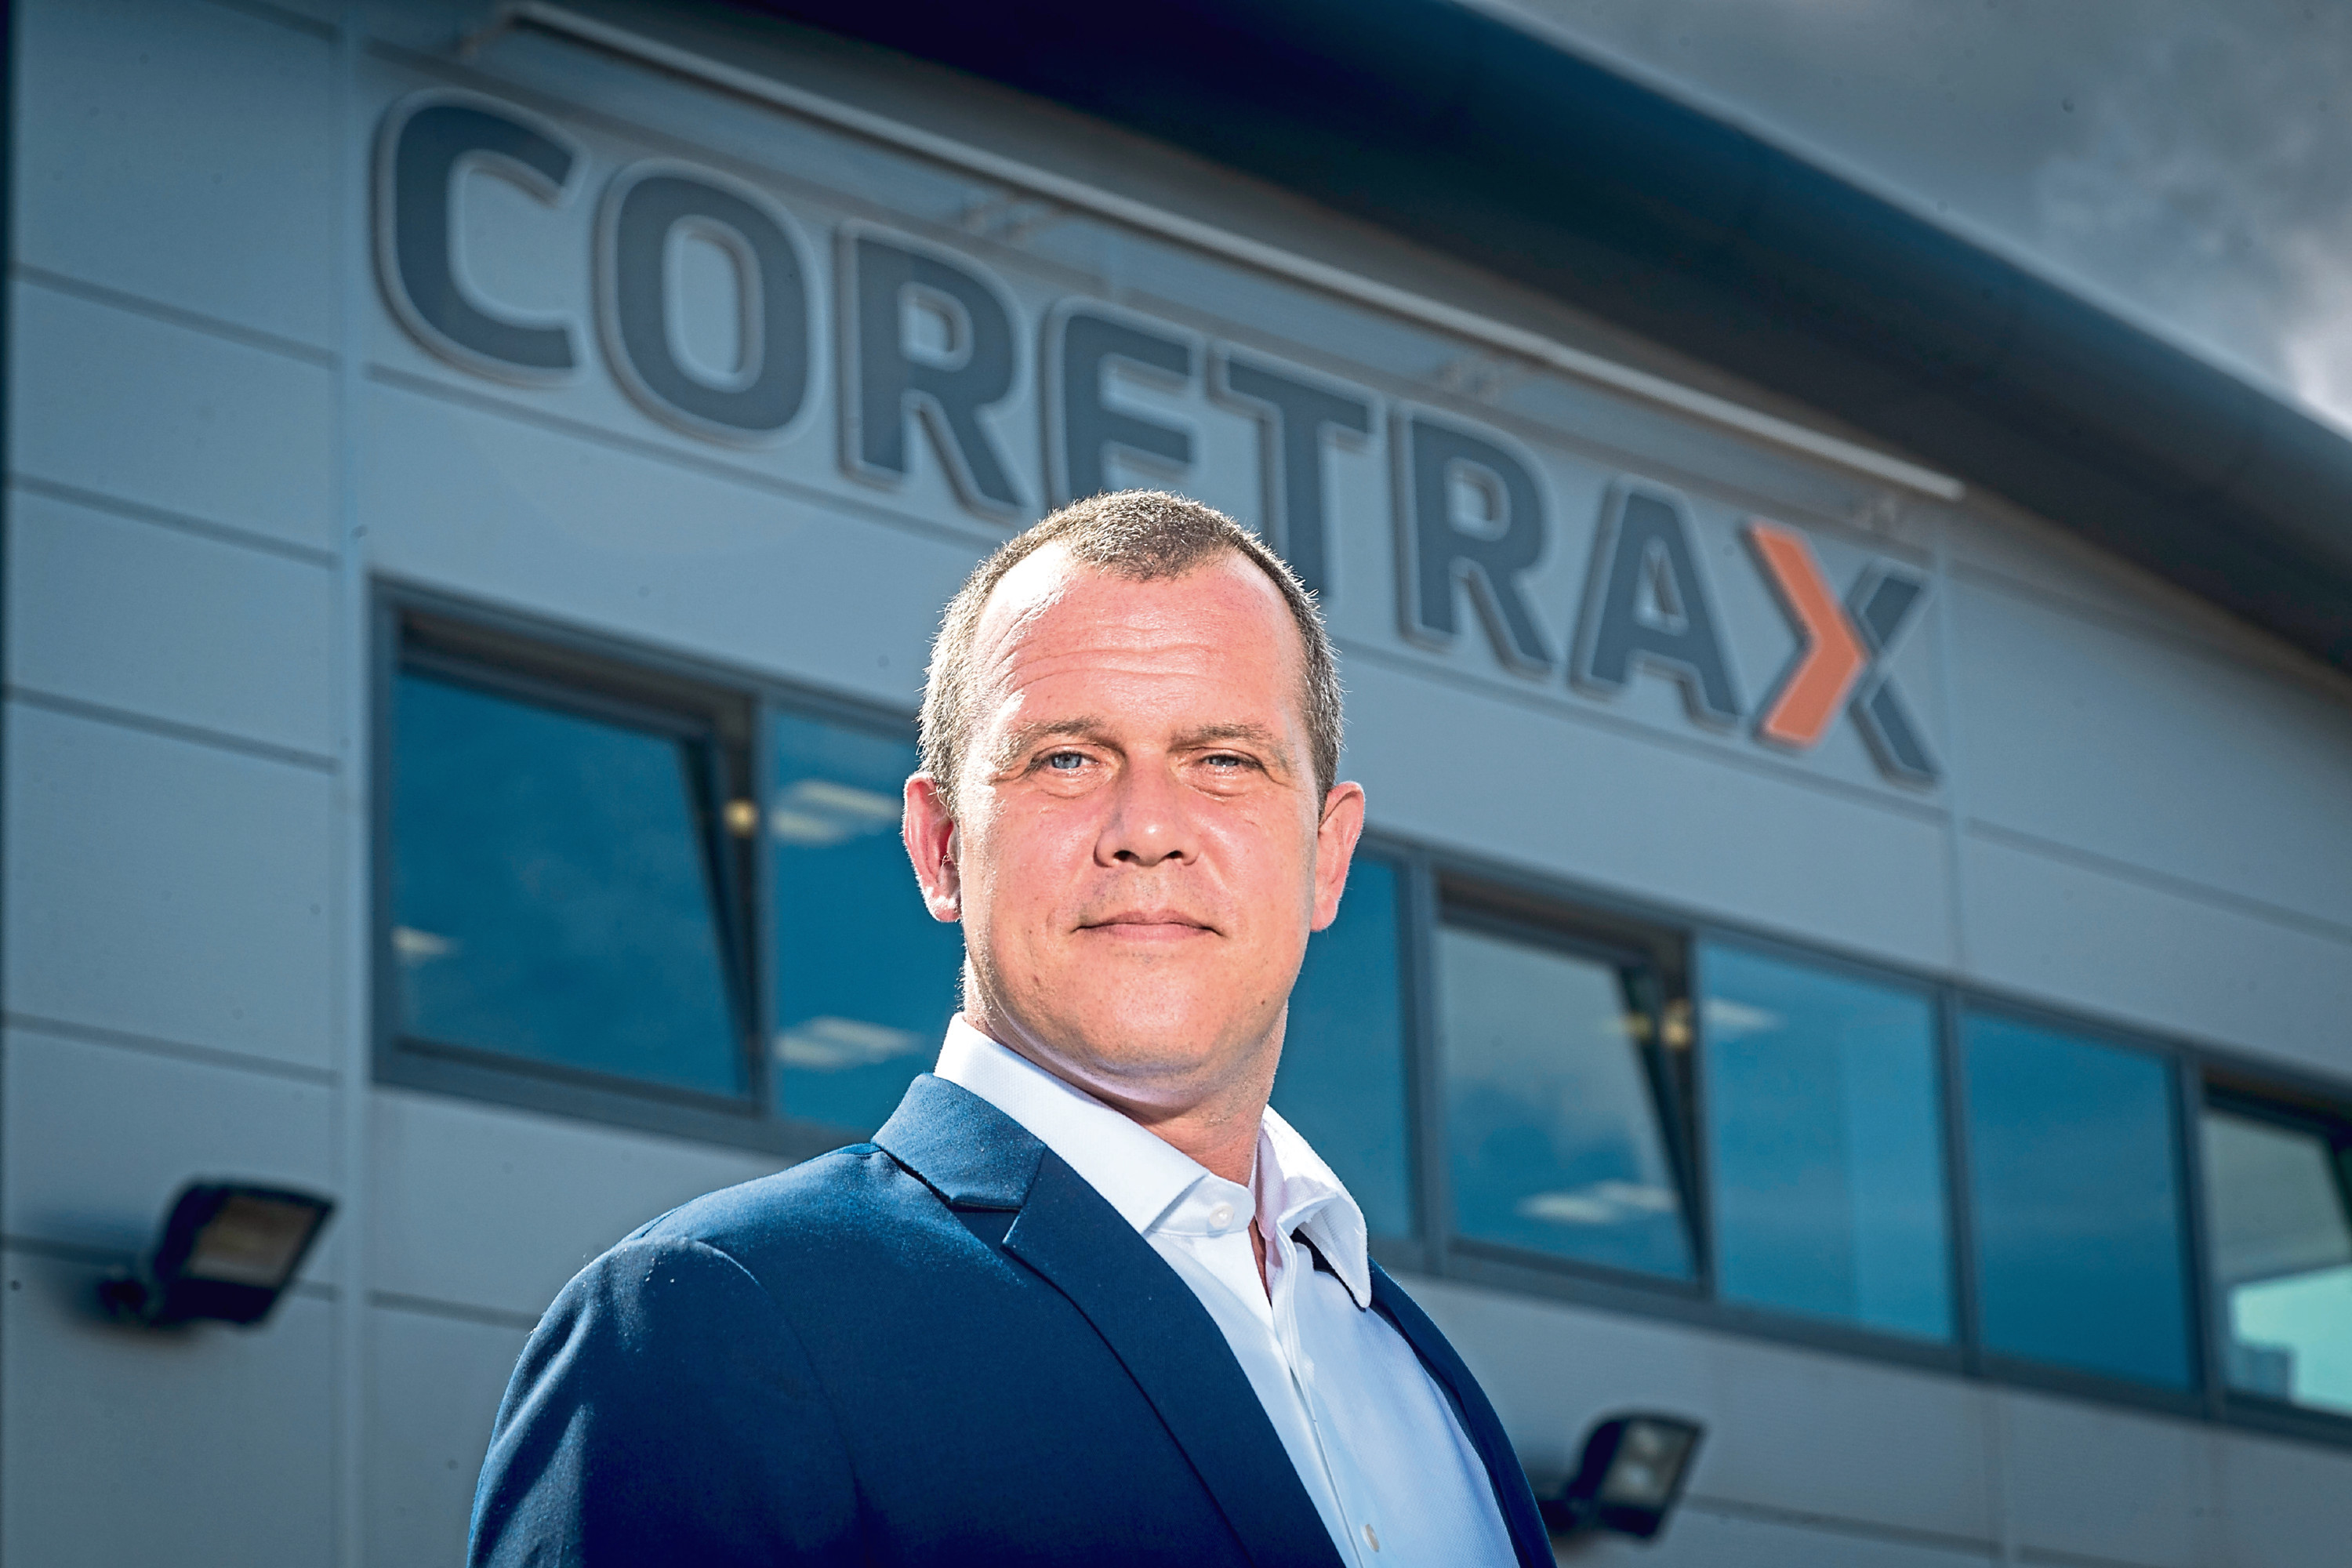 Coretrax managing director Kenny Murray says the firm is finding success across the globe